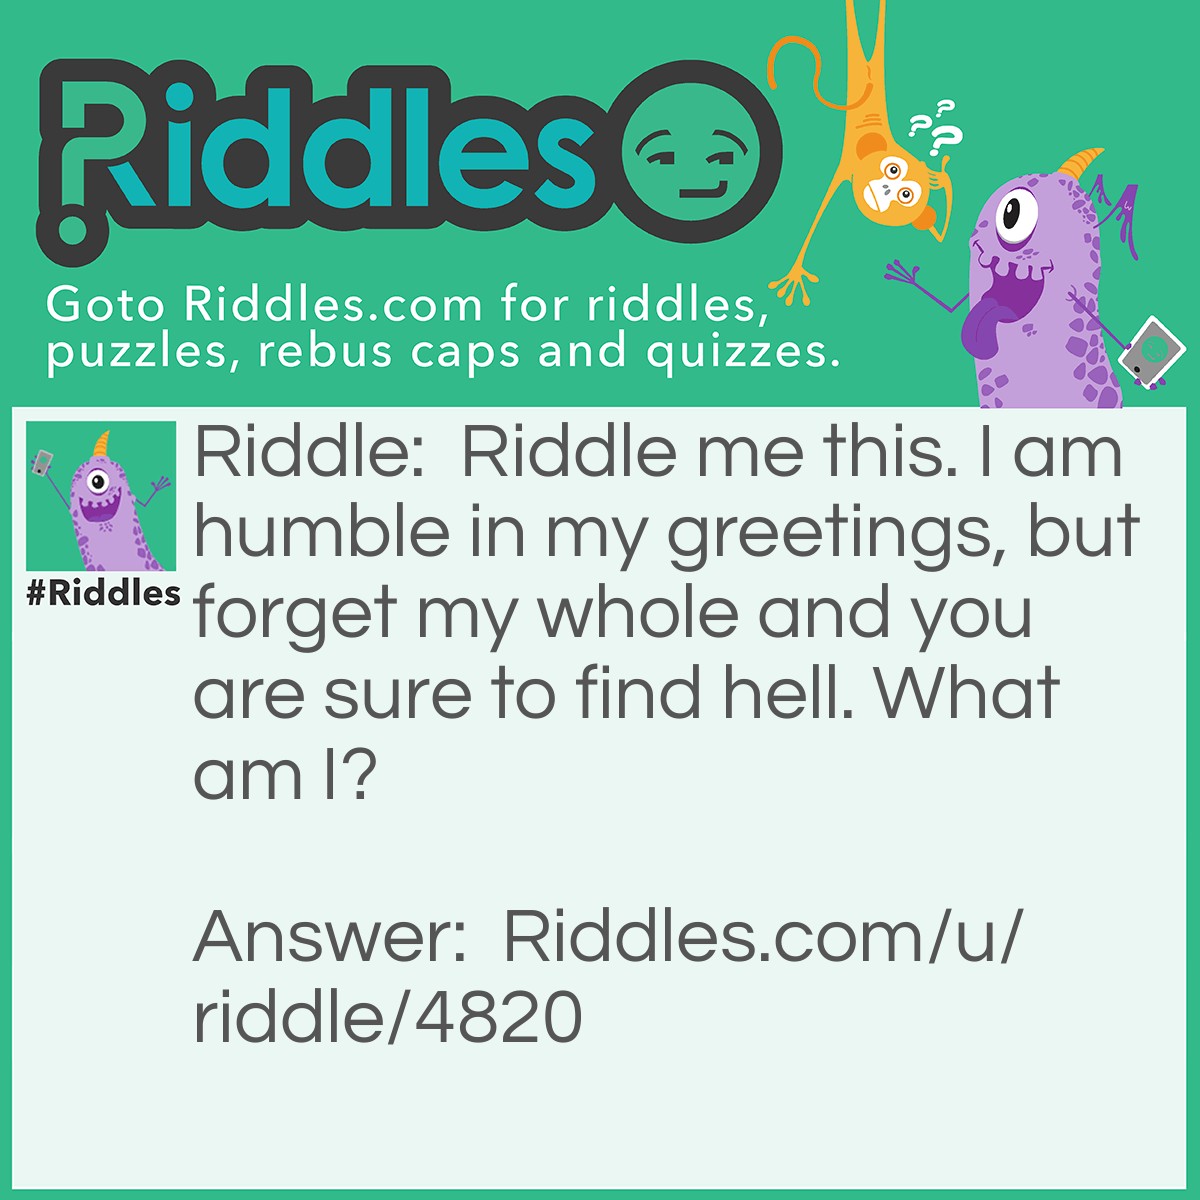 Riddle: Riddle me this. I am humble in my greetings, but forget my whole and you are sure to find hell. What am I? Answer: Hello.